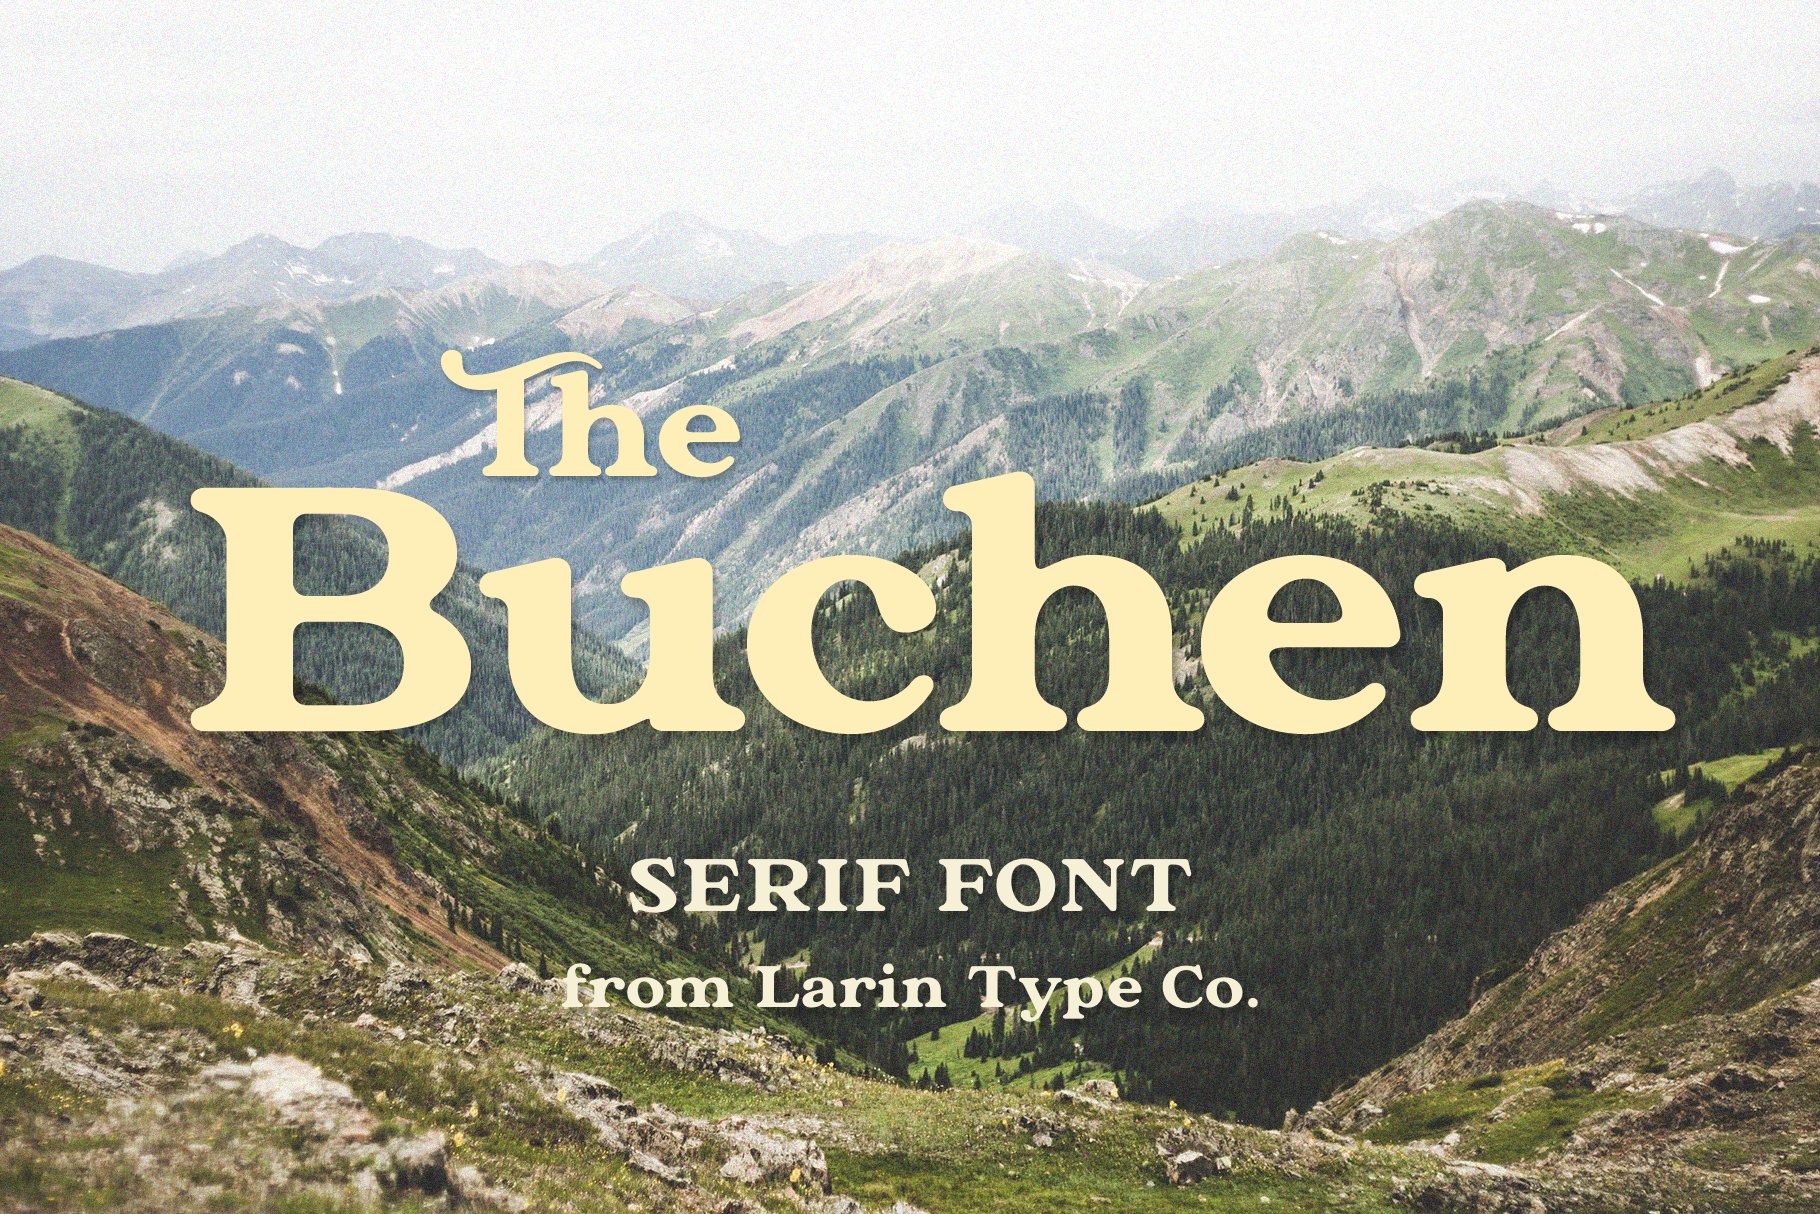 The Buchen cover image.